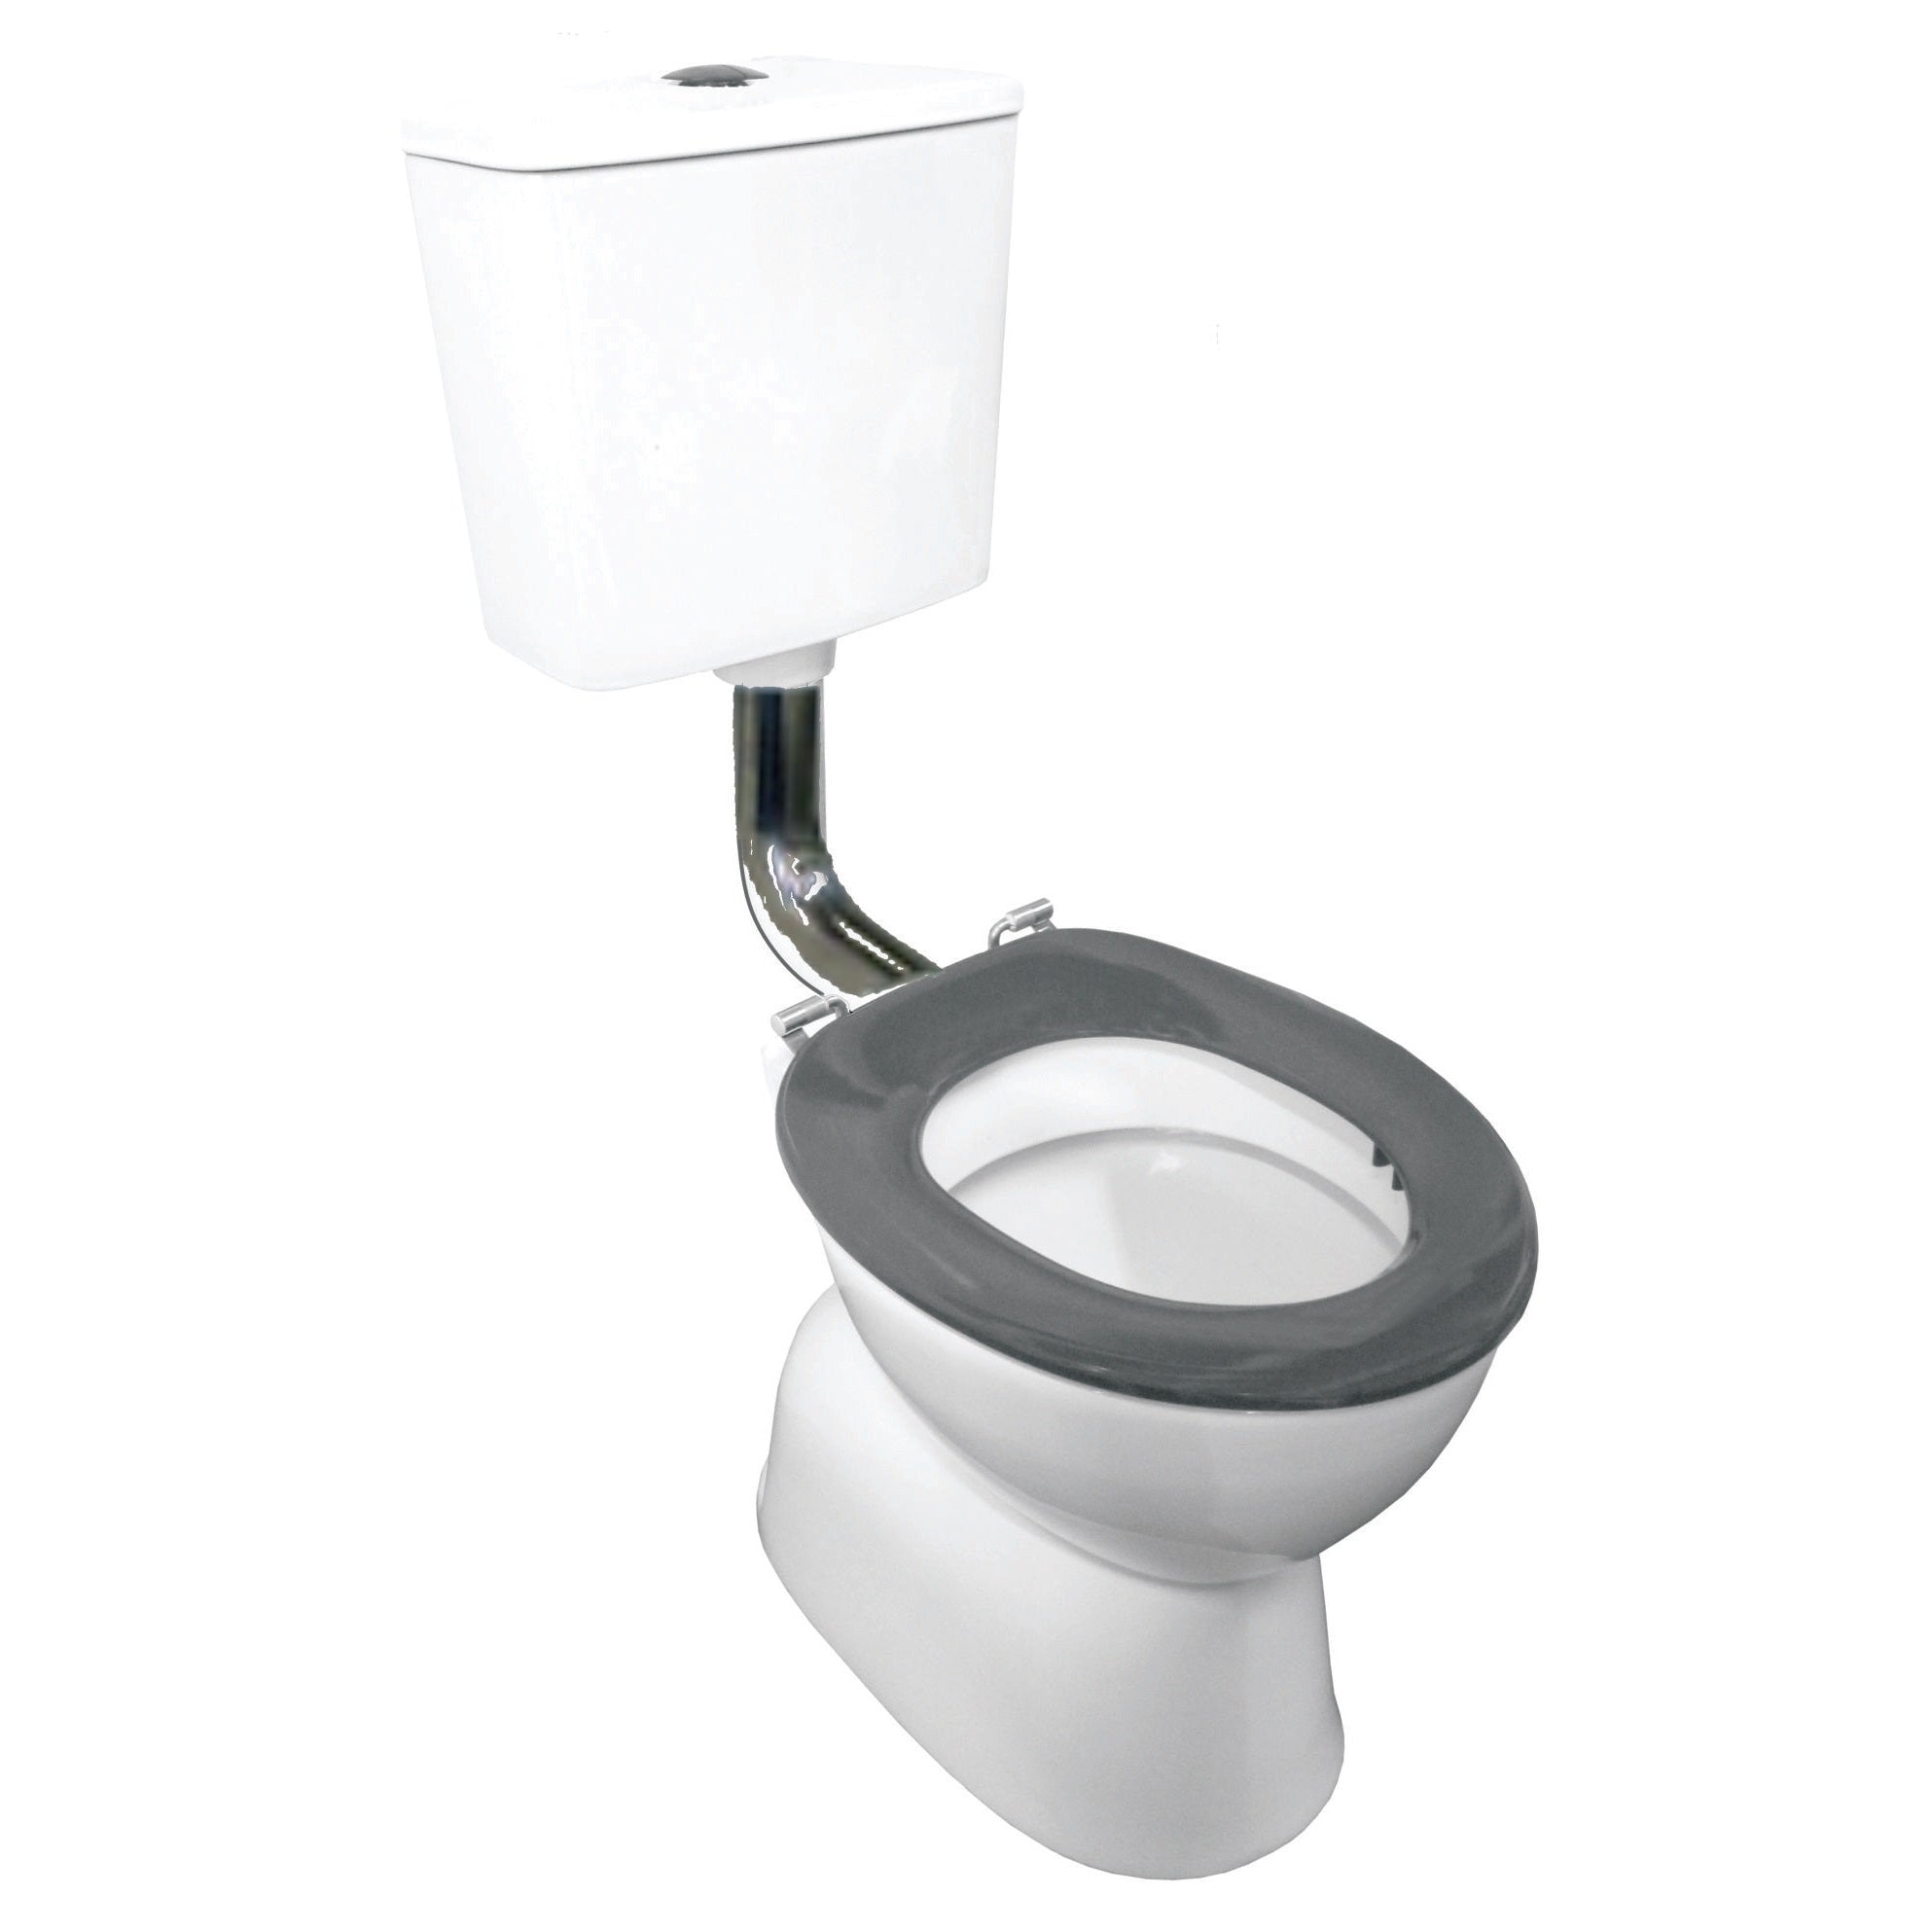 JOHNSON SUISSE PLAZA SCHOOL-WISE DELUX TOILET GLOSS WHITE